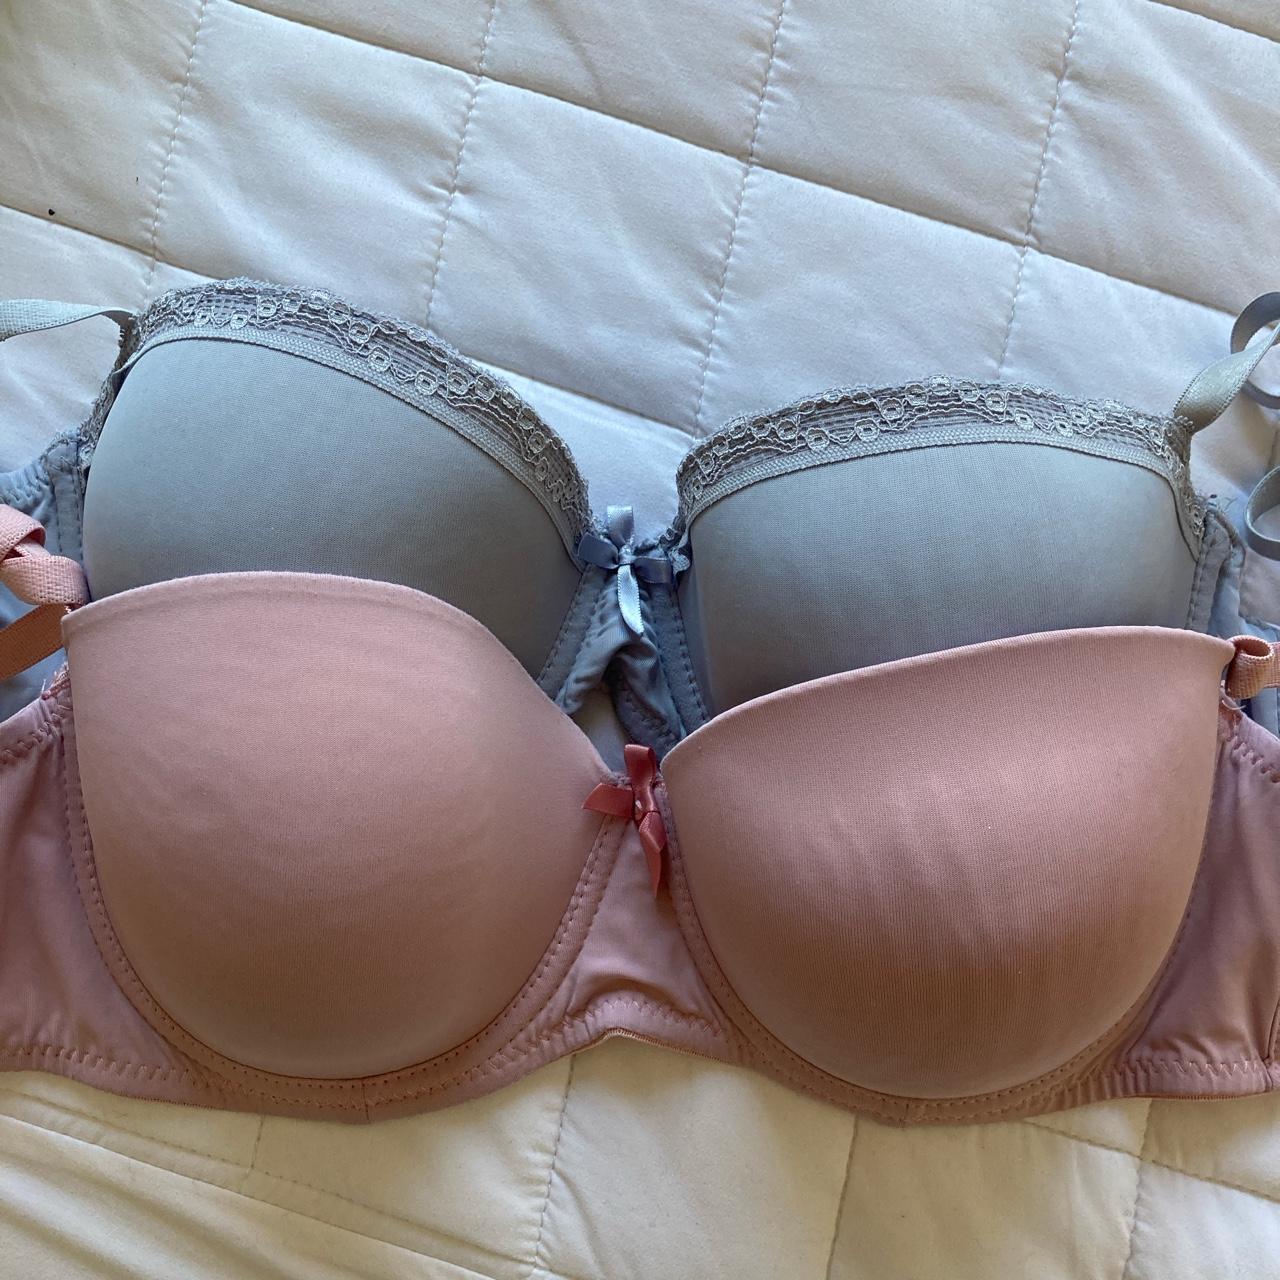 2 x Secret Possessions bras, 1 blue and one pink t